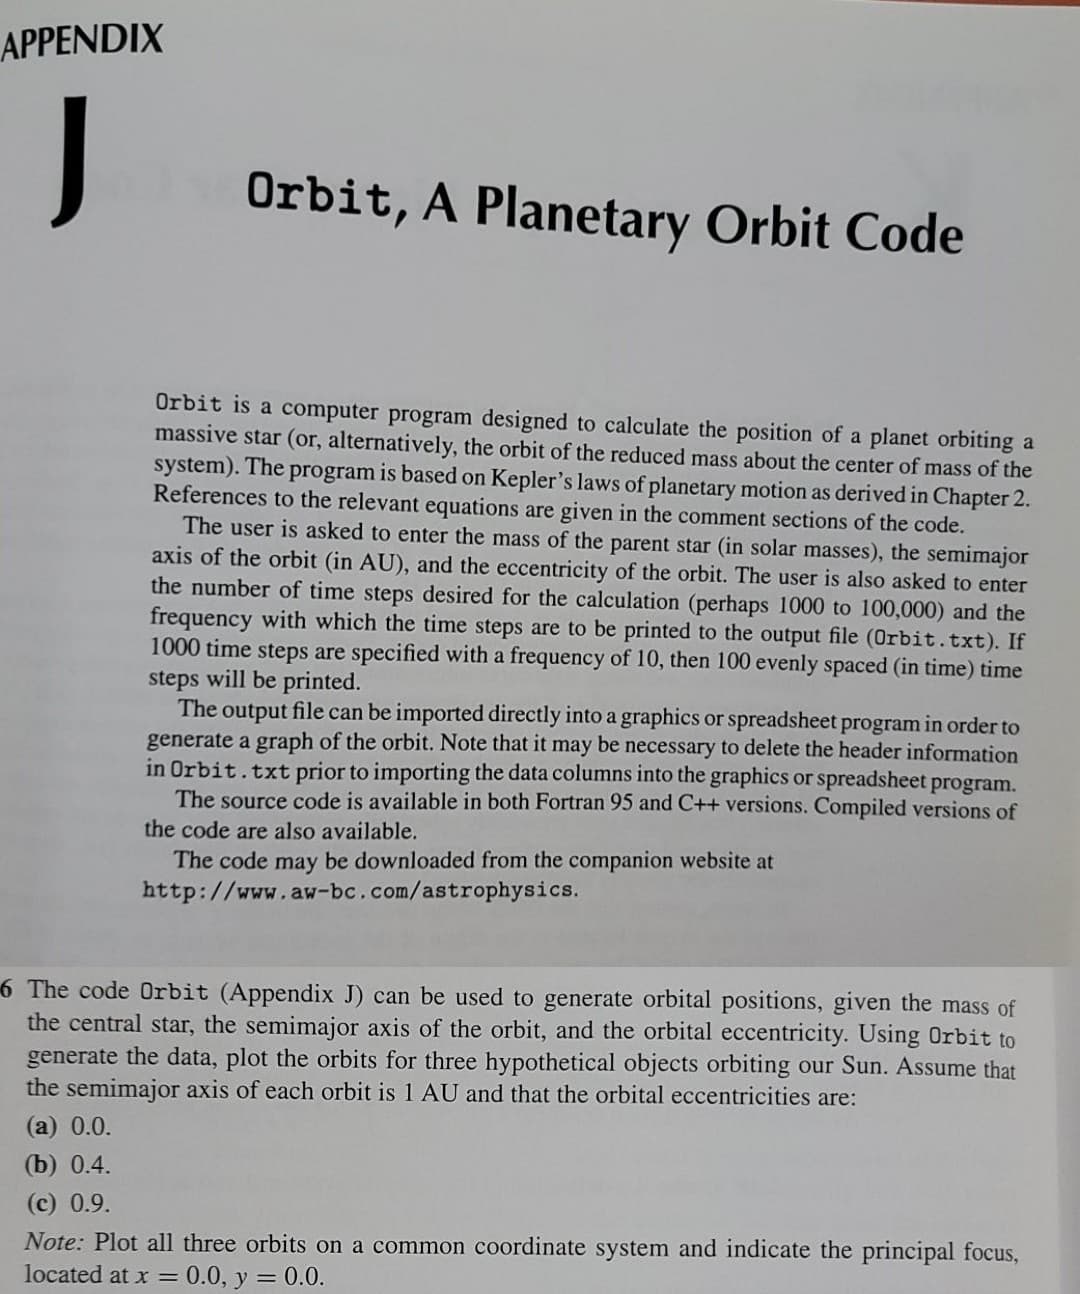 APPENDIX
J
Orbit, A Planetary Orbit Code
Orbit is a computer program designed to calculate the position of a planet orbiting a
massive star (or, alternatively, the orbit of the reduced mass about the center of mass of the
system). The program is based on Kepler's laws of planetary motion as derived in Chapter 2.
References to the relevant equations are given in the comment sections of the code.
The user is asked to enter the mass of the parent star (in solar masses), the semimajor
axis of the orbit (in AU), and the eccentricity of the orbit. The user is also asked to enter
the number of time steps desired for the calculation (perhaps 1000 to 100,000) and the
frequency with which the time steps are to be printed to the output file (0rbit.txt). If
1000 time steps are specified with a frequency of 10, then 100 evenly spaced (in time) time
steps will be printed.
The output file can be imported directly into a graphics or spreadsheet program in order to
generate a graph of the orbit. Note that it may be necessary to delete the header information
in Orbit.txt prior to importing the data columns into the graphics or spreadsheet program.
The source code is available in both Fortran 95 and C++ versions. Compiled versions of
the code are also available.
The code may be downloaded from the companion website at
http://www.aw-bc.com/astrophysics.
6 The code 0rbit (Appendix J) can be used to generate orbital positions, given the mass of
the central star, the semimajor axis of the orbit, and the orbital eccentricity. Using Orbit to
generate the data, plot the orbits for three hypothetical objects orbiting our Sun. Assume that
the semimajor axis of each orbit is 1 AU and that the orbital eccentricities are:
(a) 0.0.
(b) 0.4.
(с) 0.9.
Note: Plot all three orbits on a common coordinate system and indicate the principal focus,
located at x = 0.0, y = 0.0.
